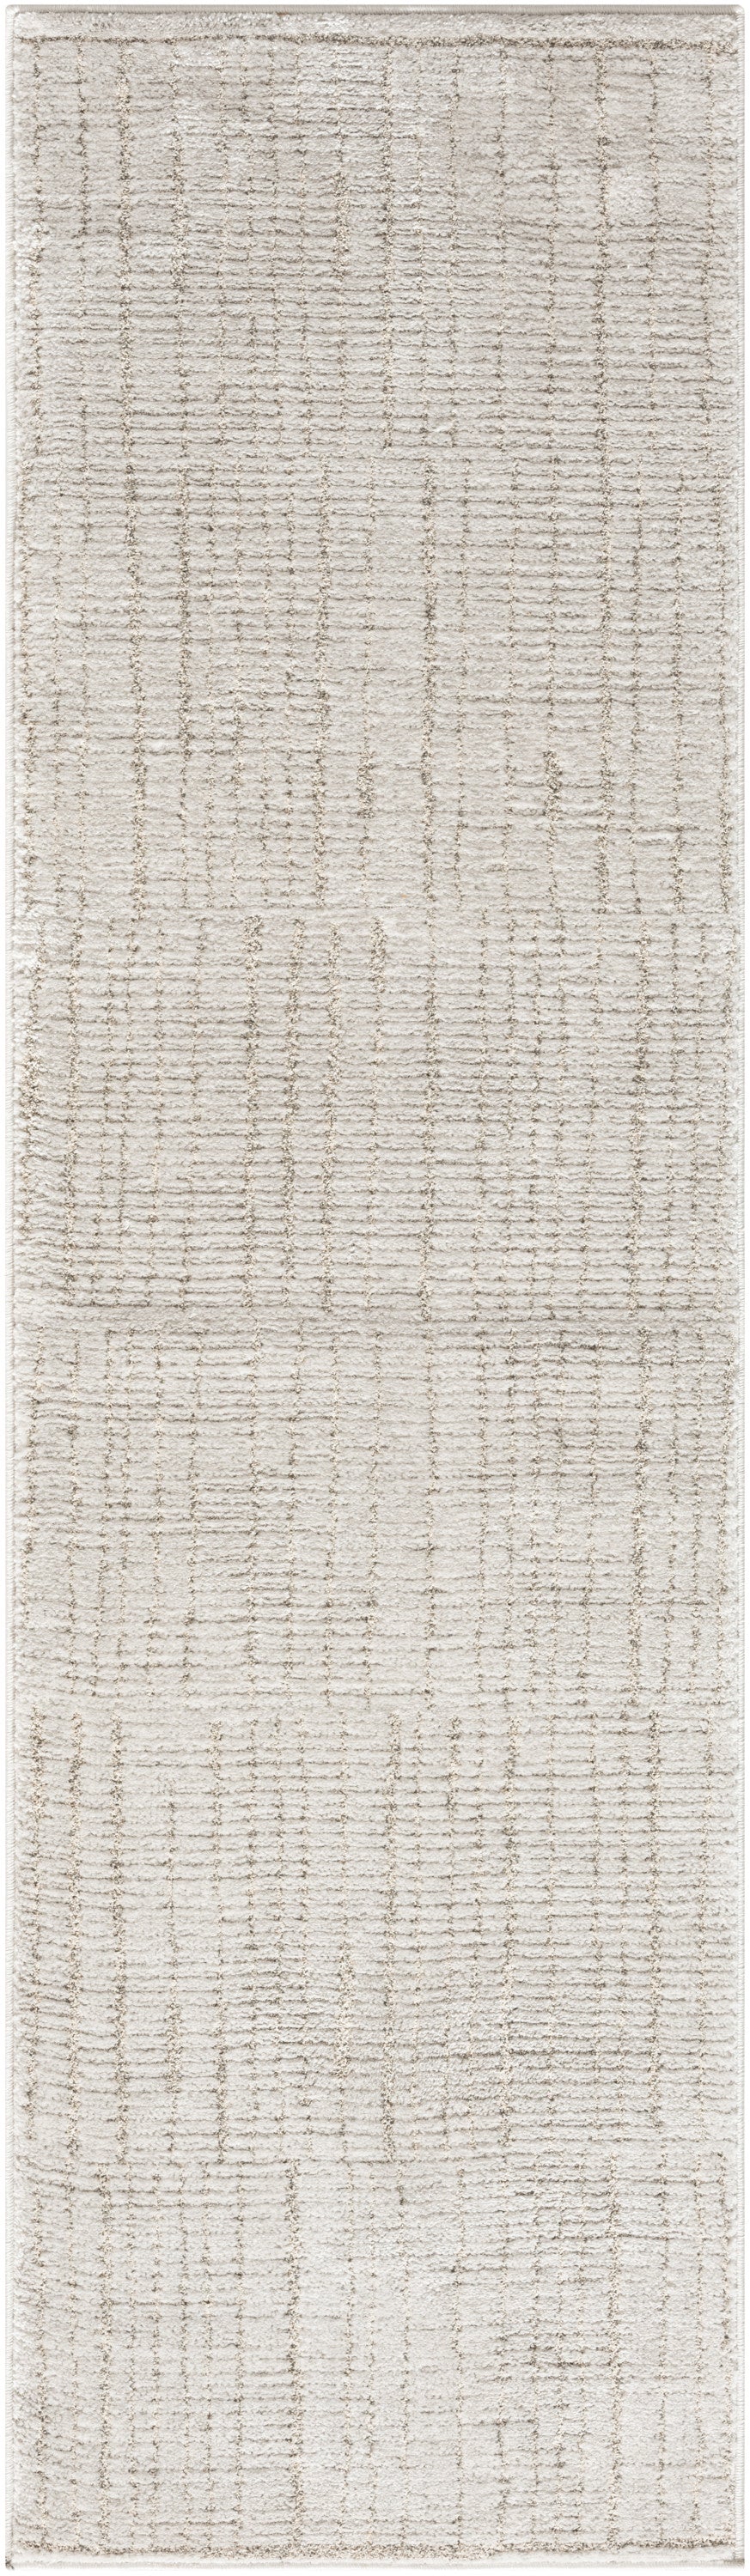 Nourison Home Andes AND06 Silver Contemporary Woven Rug